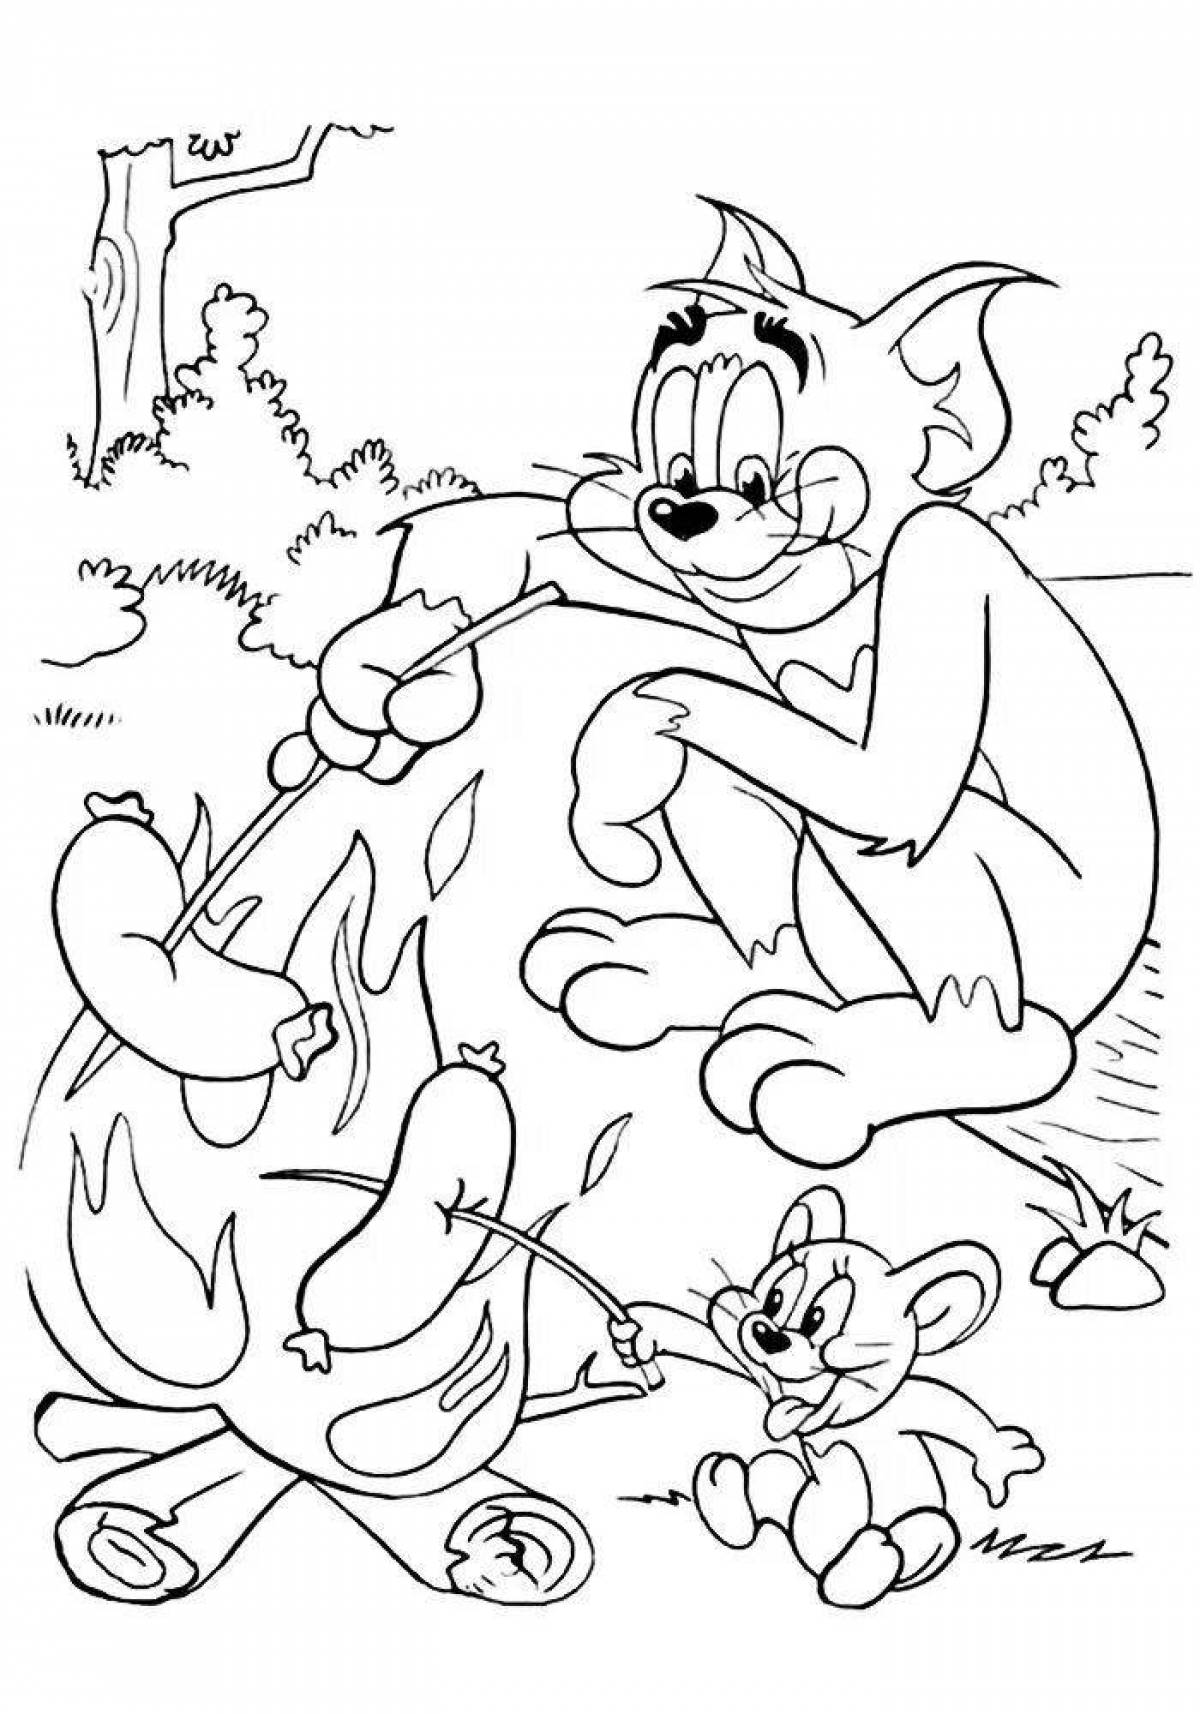 Marvelous tom and jerry coloring book